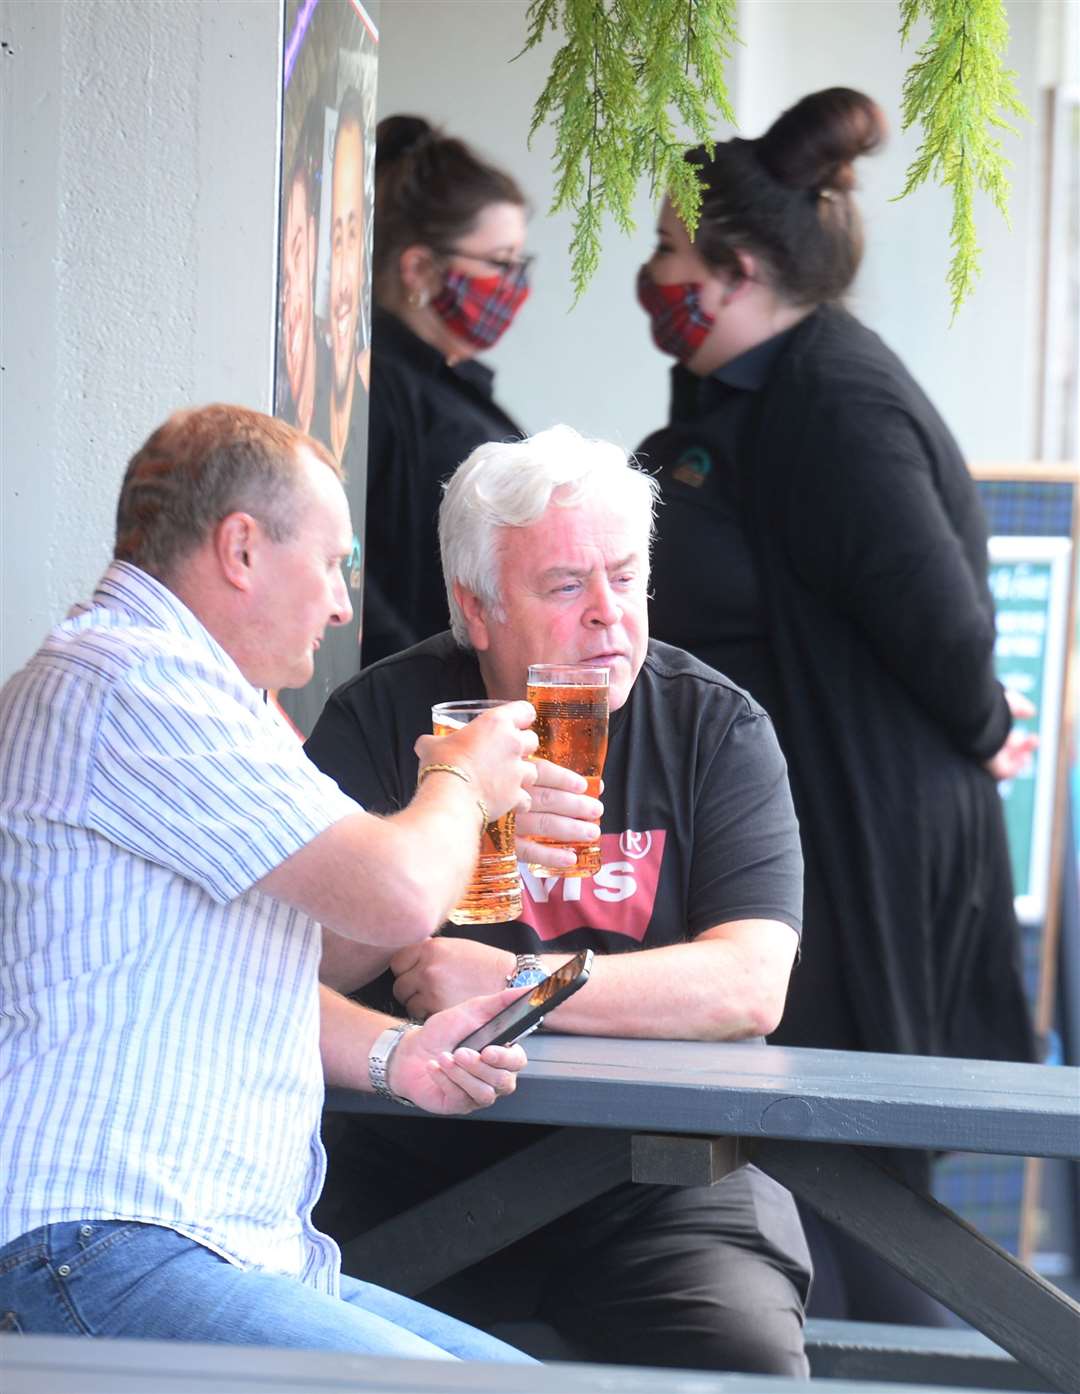 Outdoor drinking was allowed again at pubs from today.